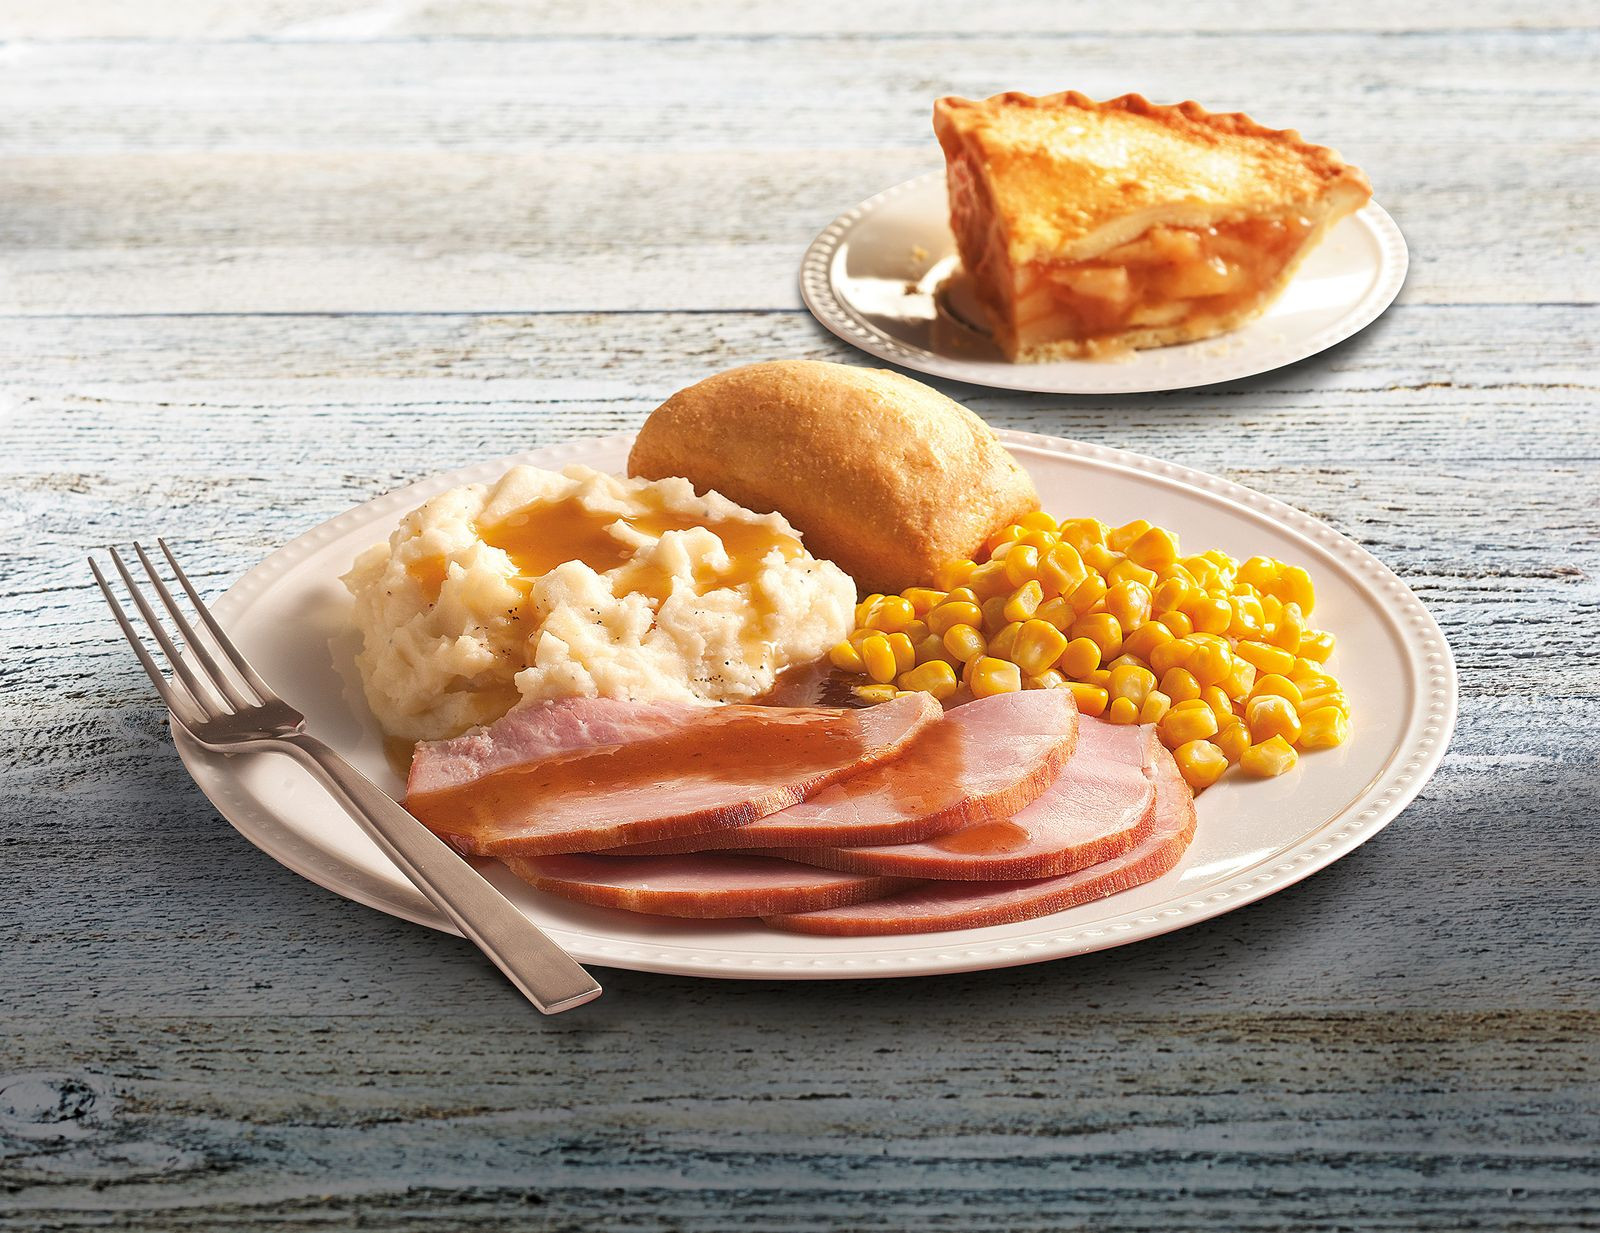 Easter Dinner Boston
 Boston Market Puts Easter Dinner The Table With A Host